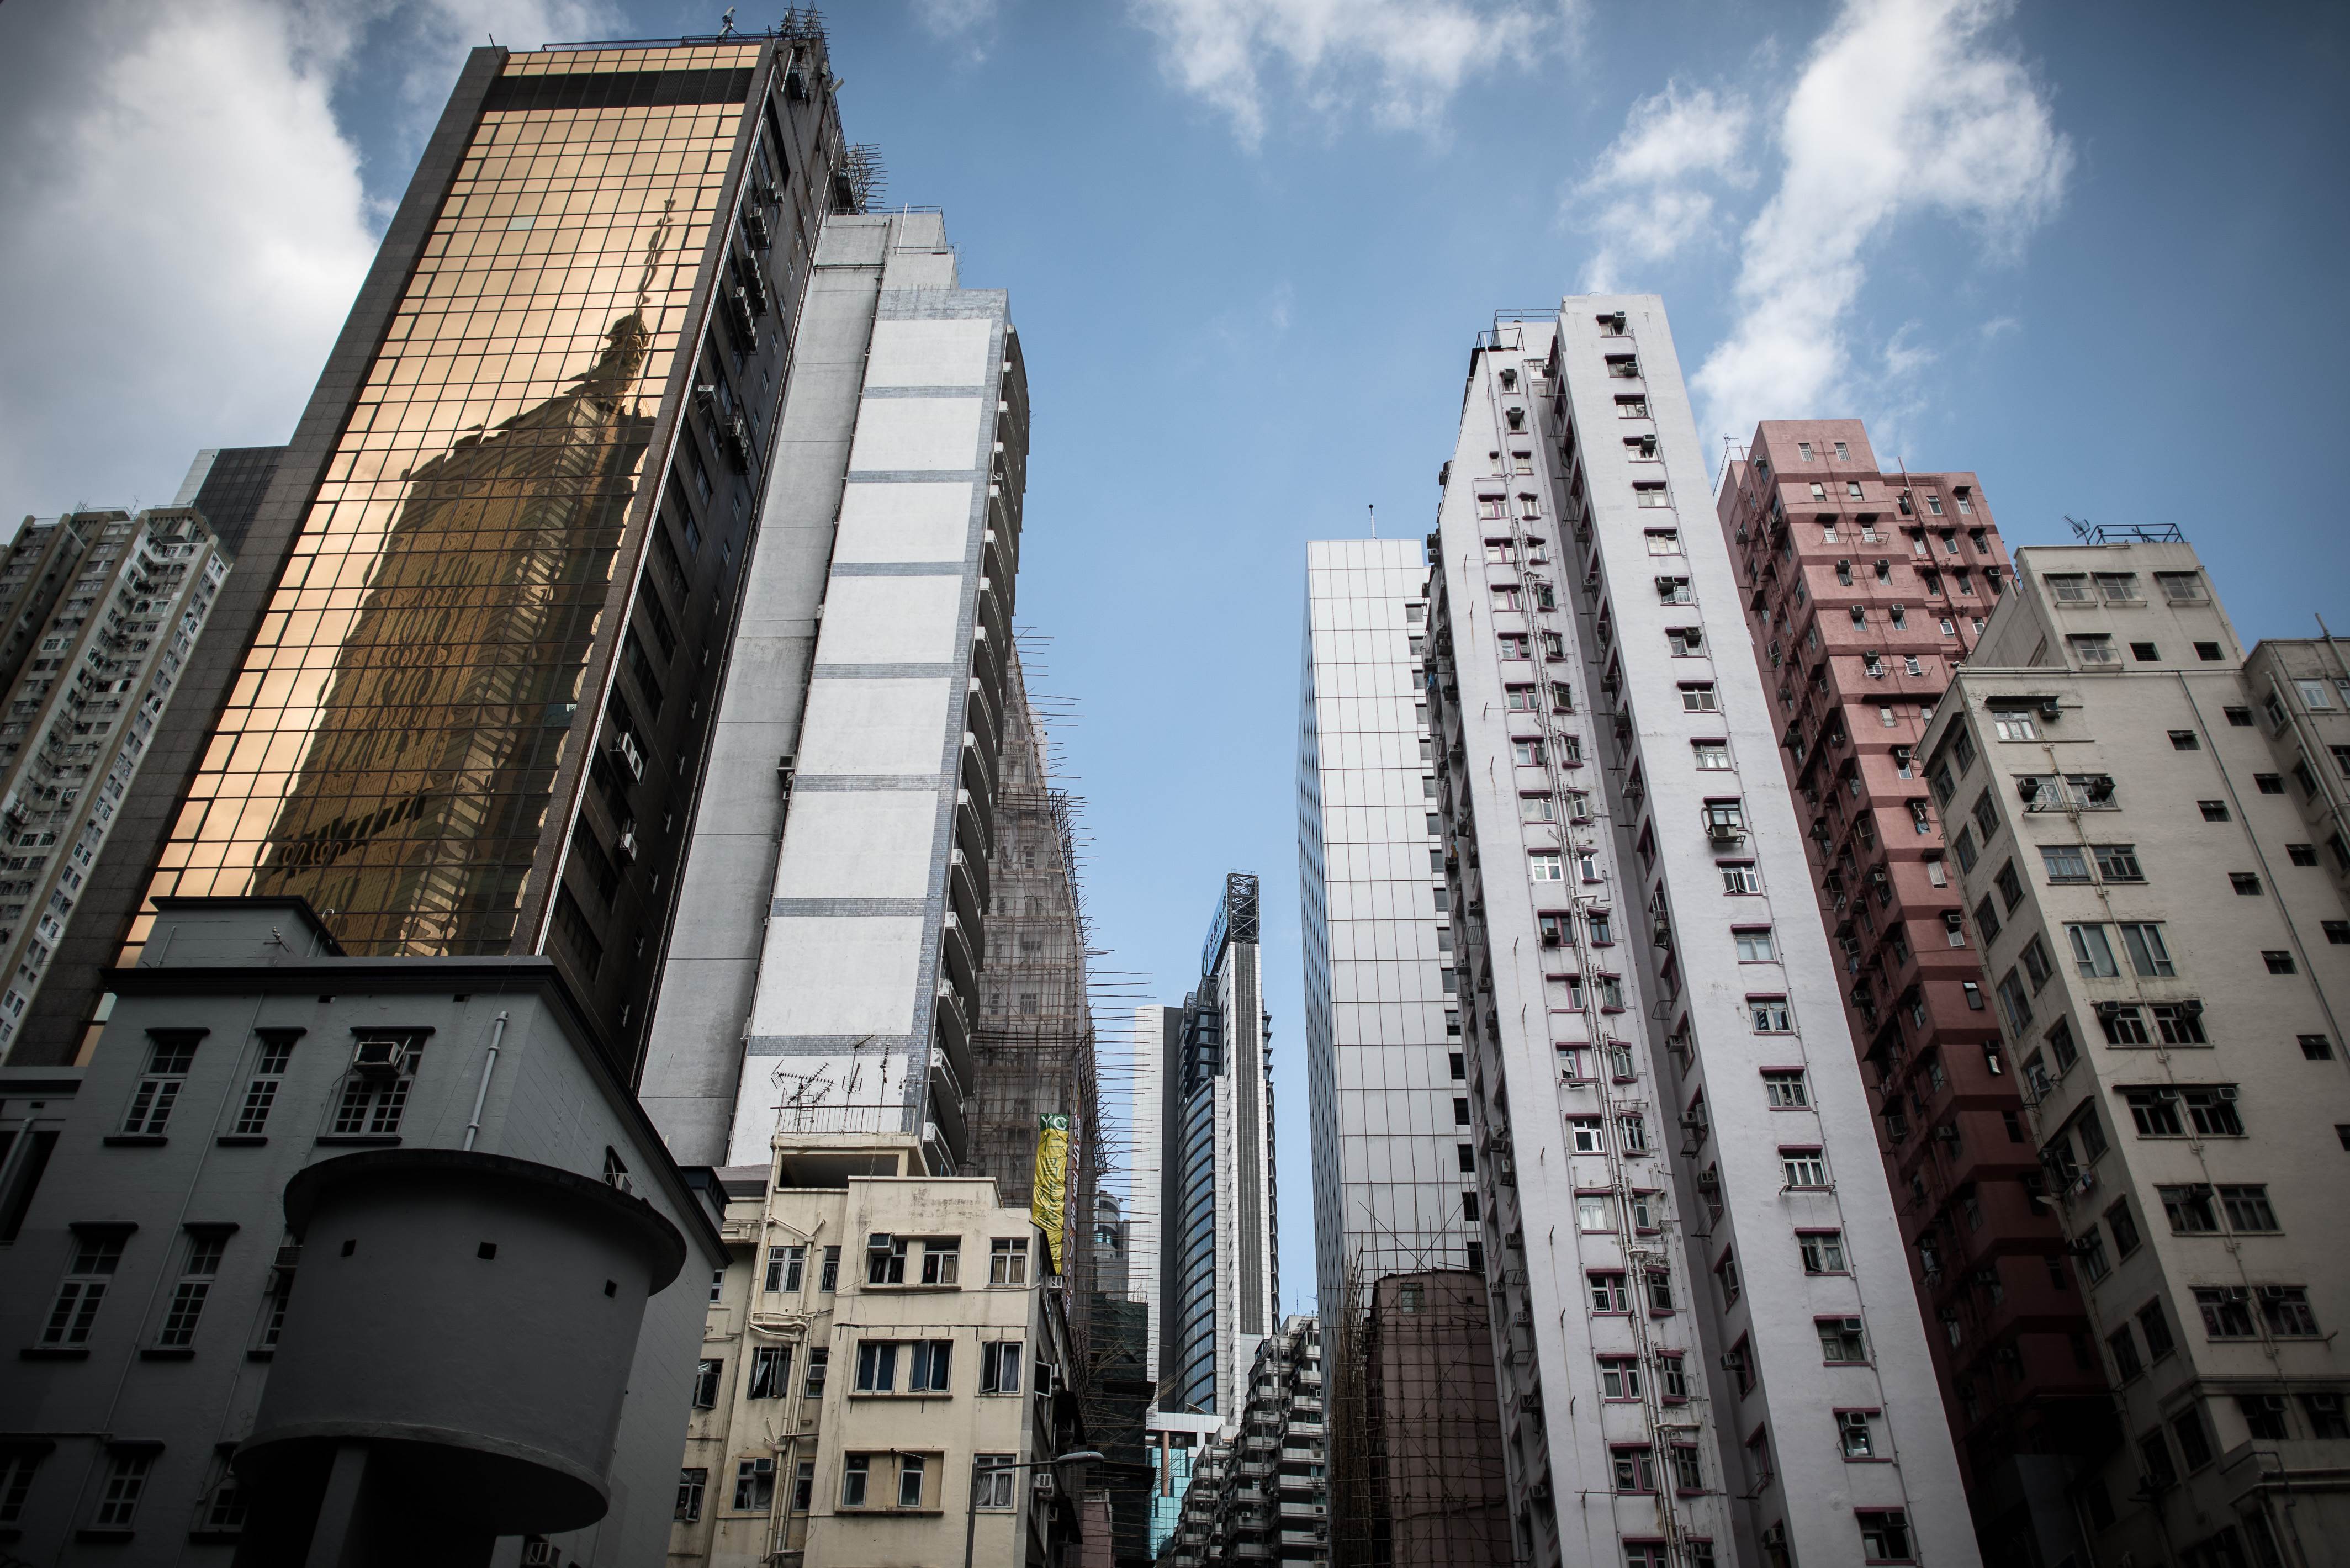 TO GO WITH HongKong-US-economy-property,FOCUS by Dennis CHONG This picture taken on October 22, 2015 shows high-rise buildings in Hong Kong. Buoyed by record-low borrowing costs, a Hong Kong housing boom has seen prices more than double in six years, making it one of the world's most expensive property markets, but experts warn a US interest rate hike could send valuations plunging. AFP PHOTO / Philippe Lopez